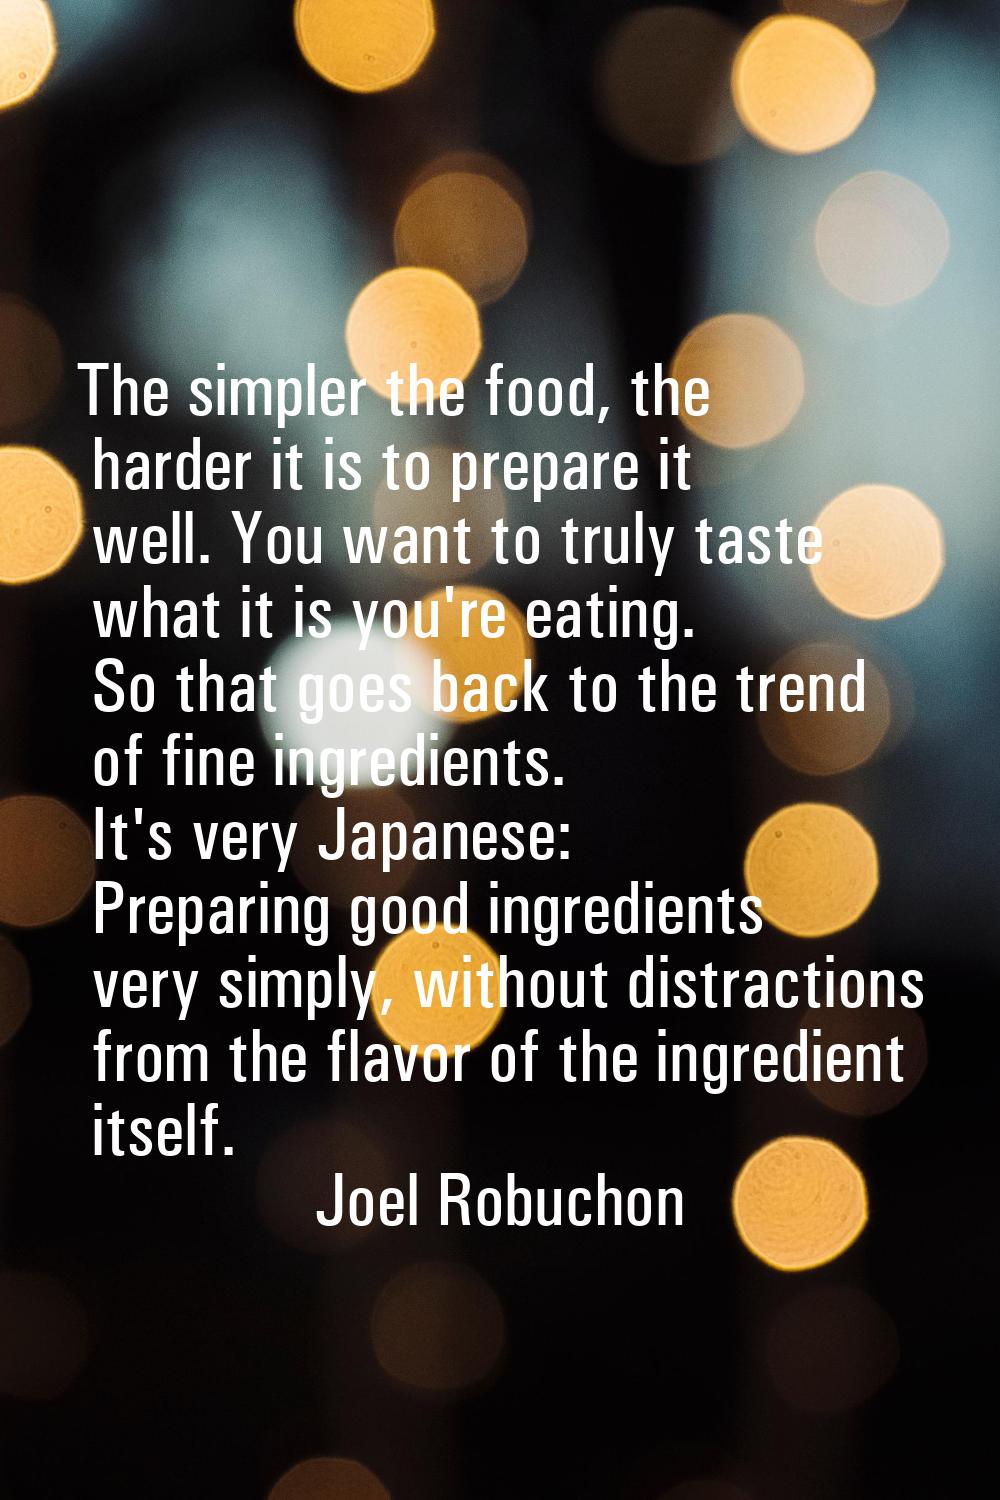 The simpler the food, the harder it is to prepare it well. You want to truly taste what it is you'r